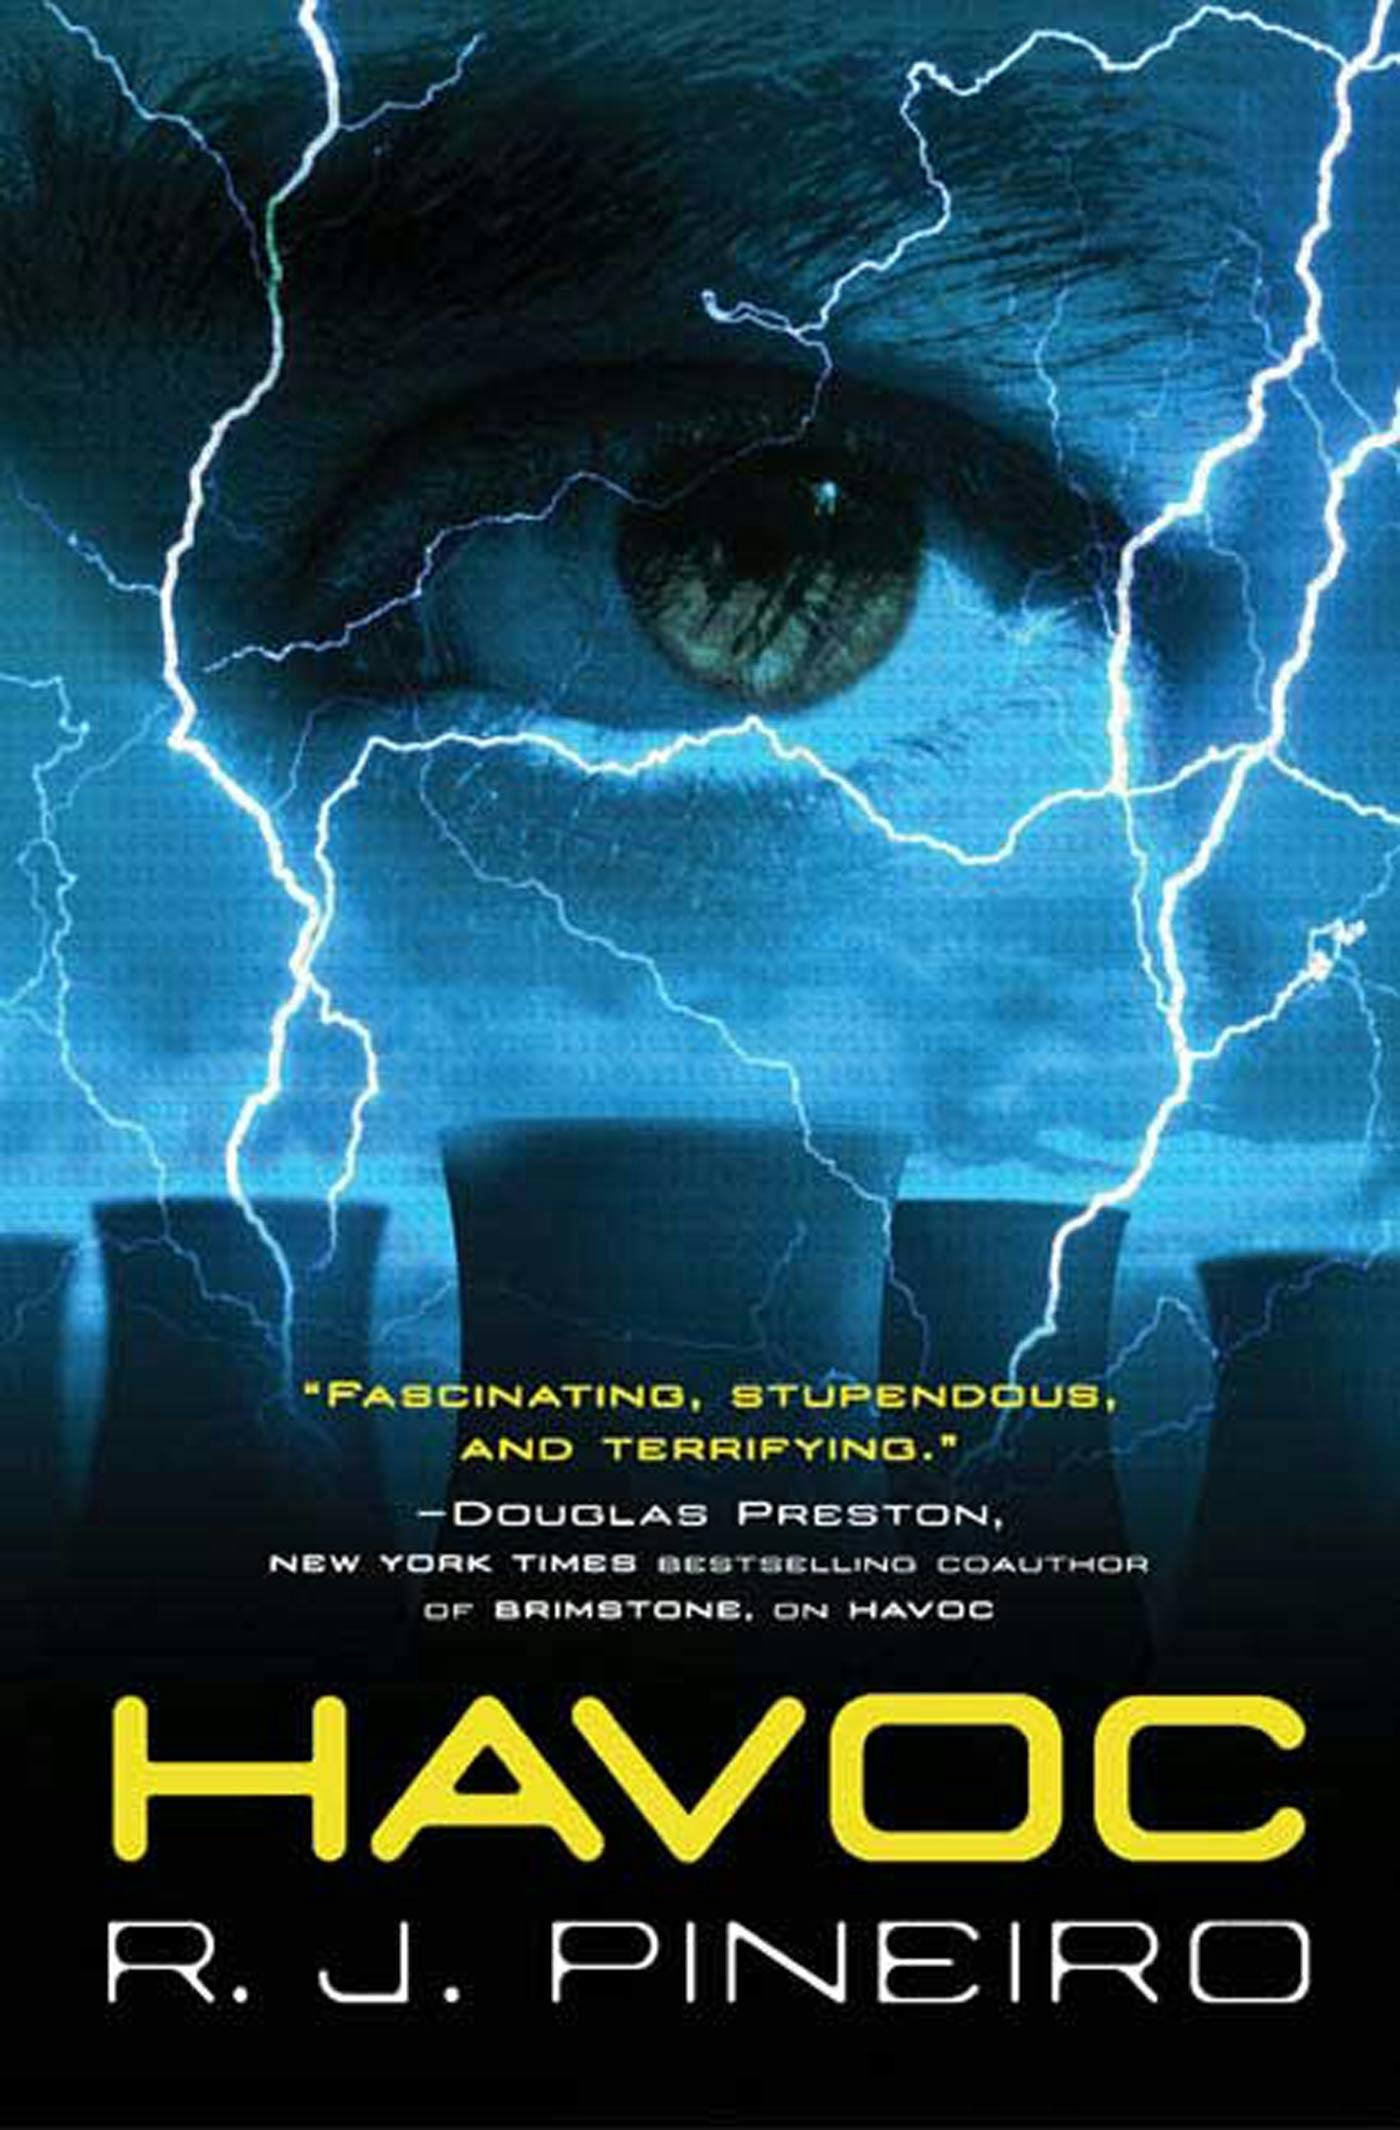 Cover for the book titled as: Havoc